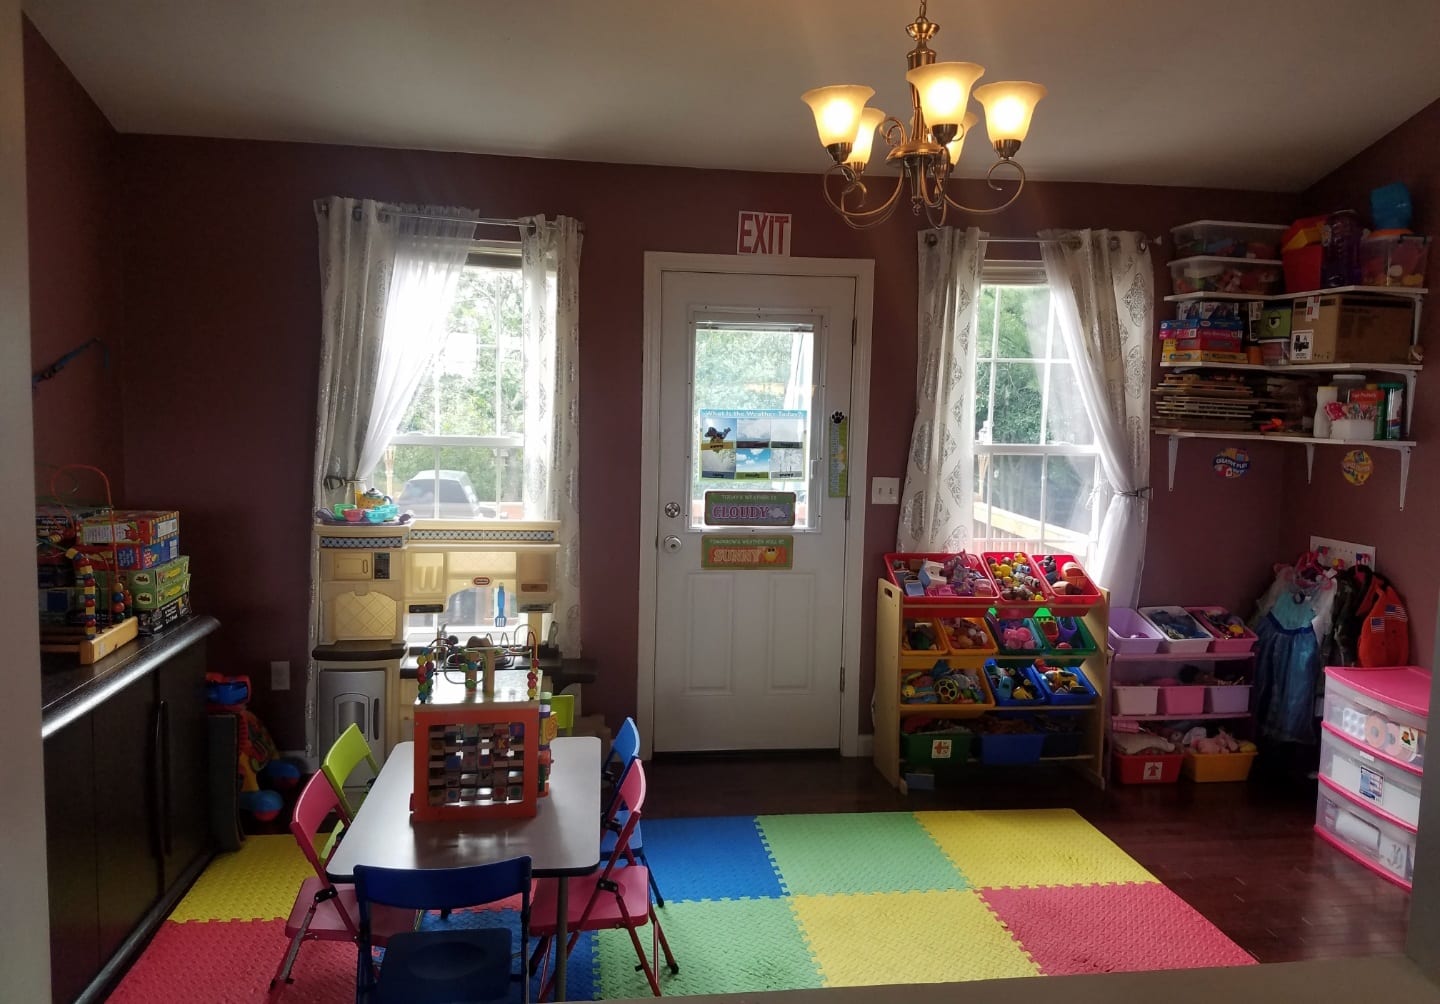 daycare setup pictures